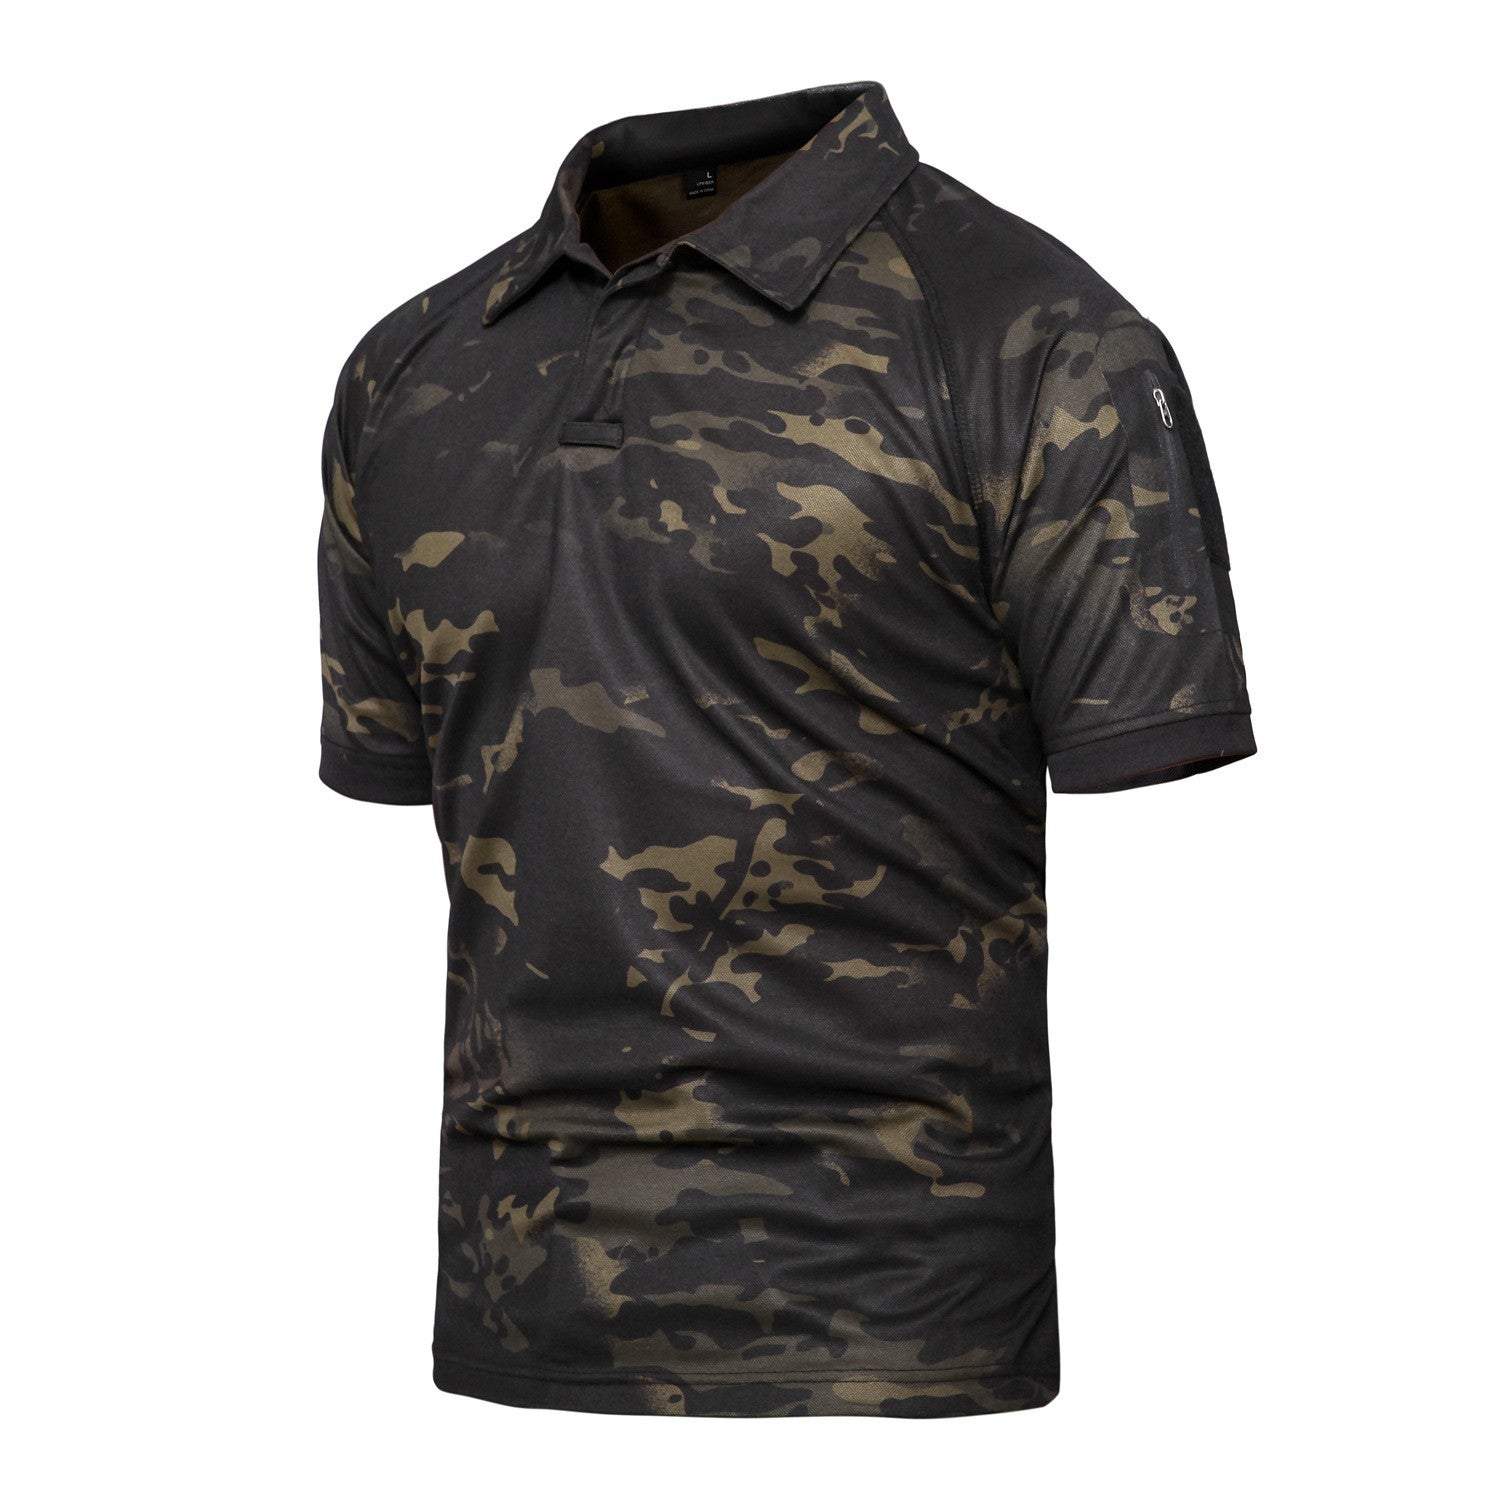  Military Matter Outdoor Men Tactical Camouflage Short sleeved shirt | The Best CS Tactical Clothing Store